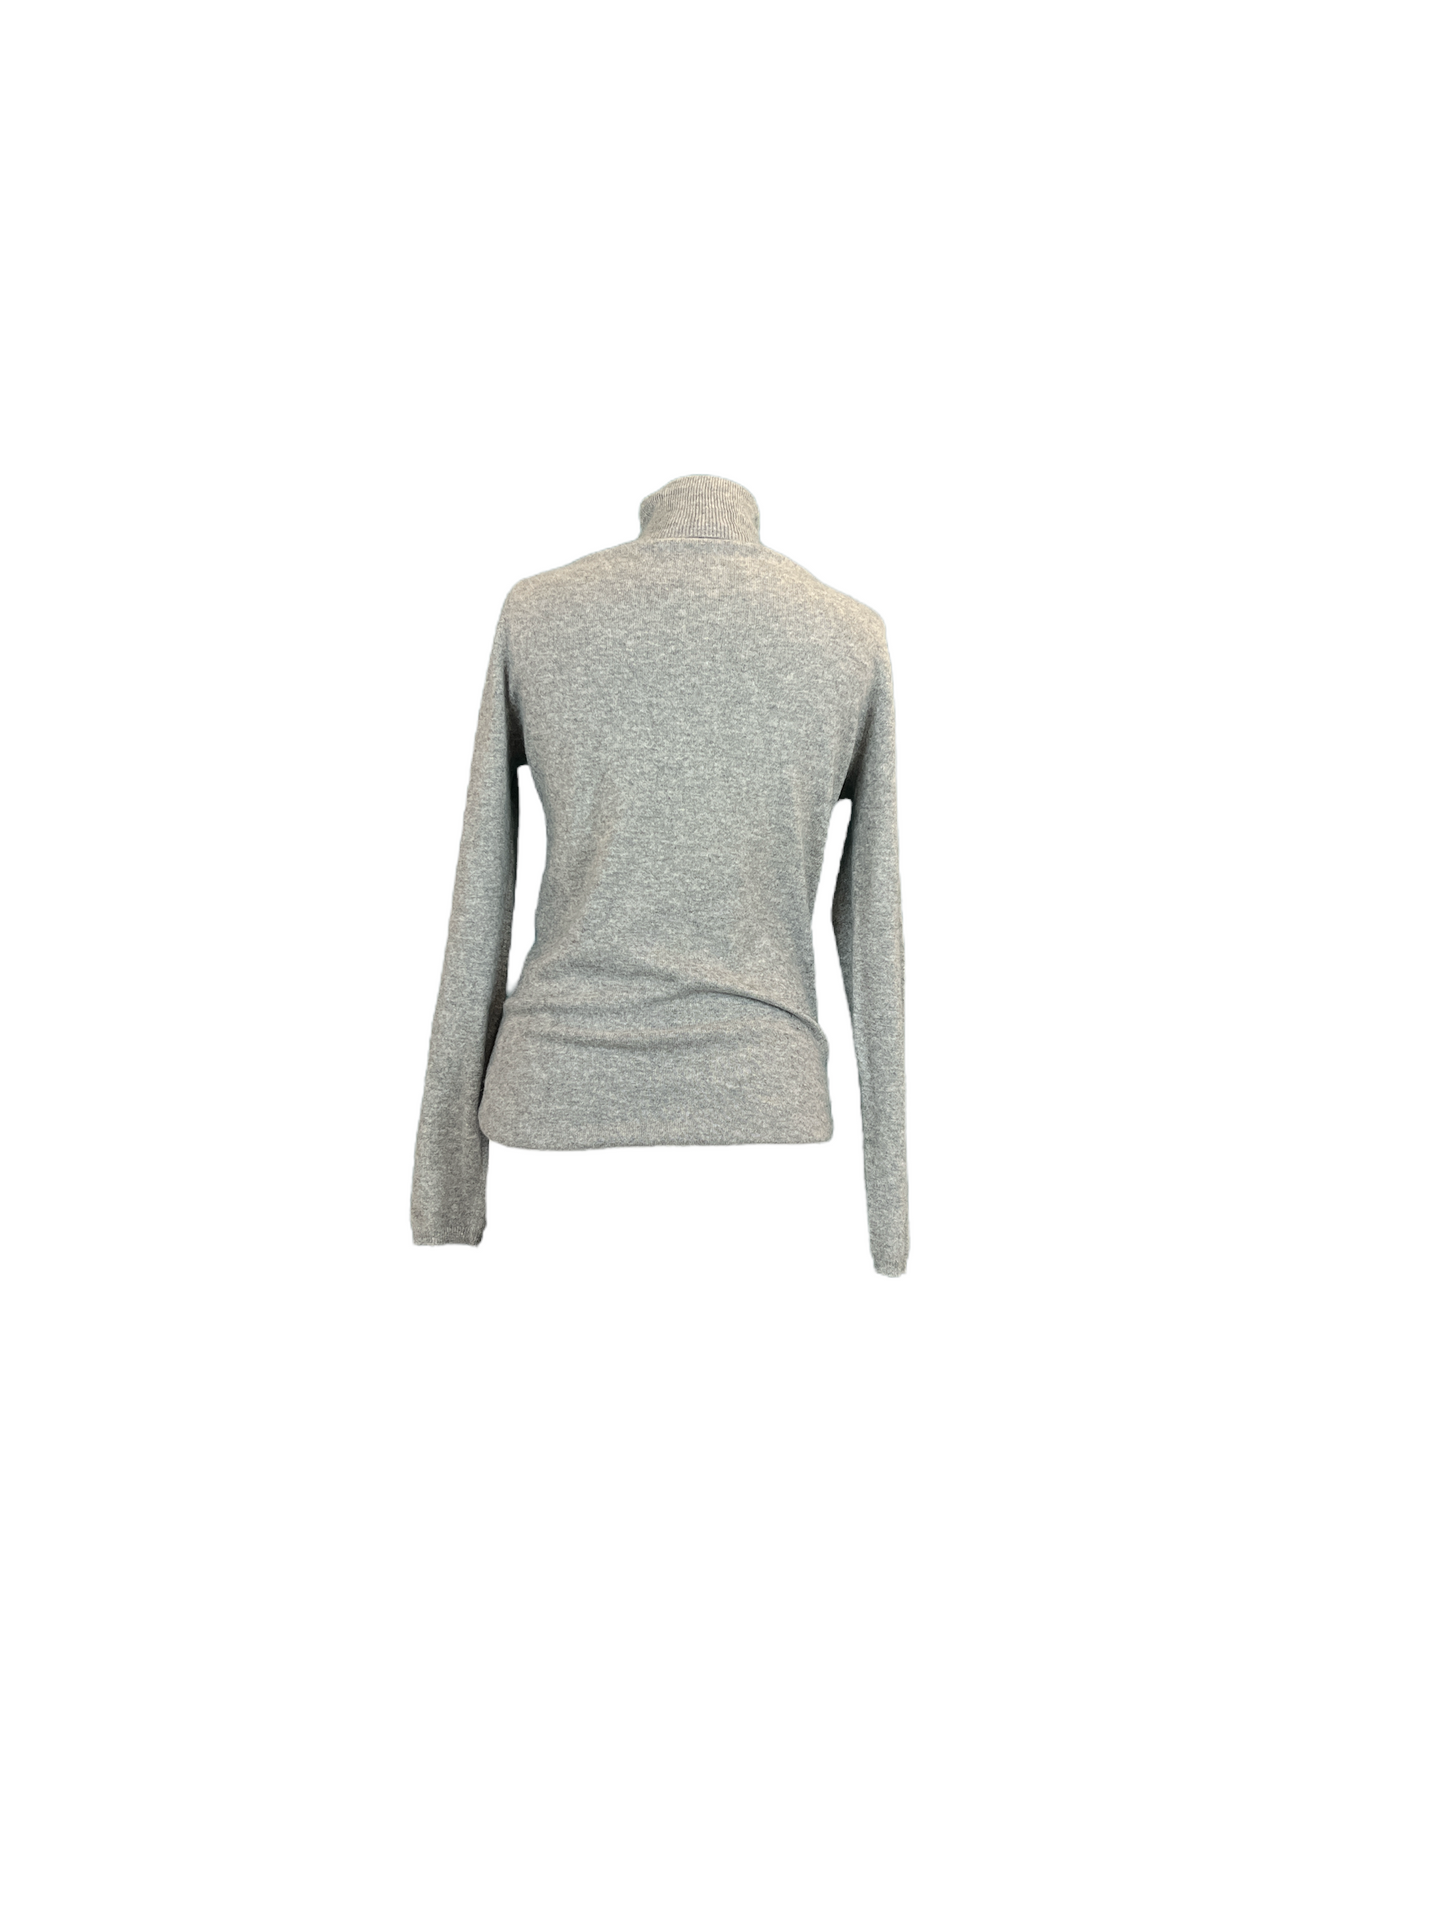 Womens Nice Connection 100% Cashmere Turtle Neck Sweater - S